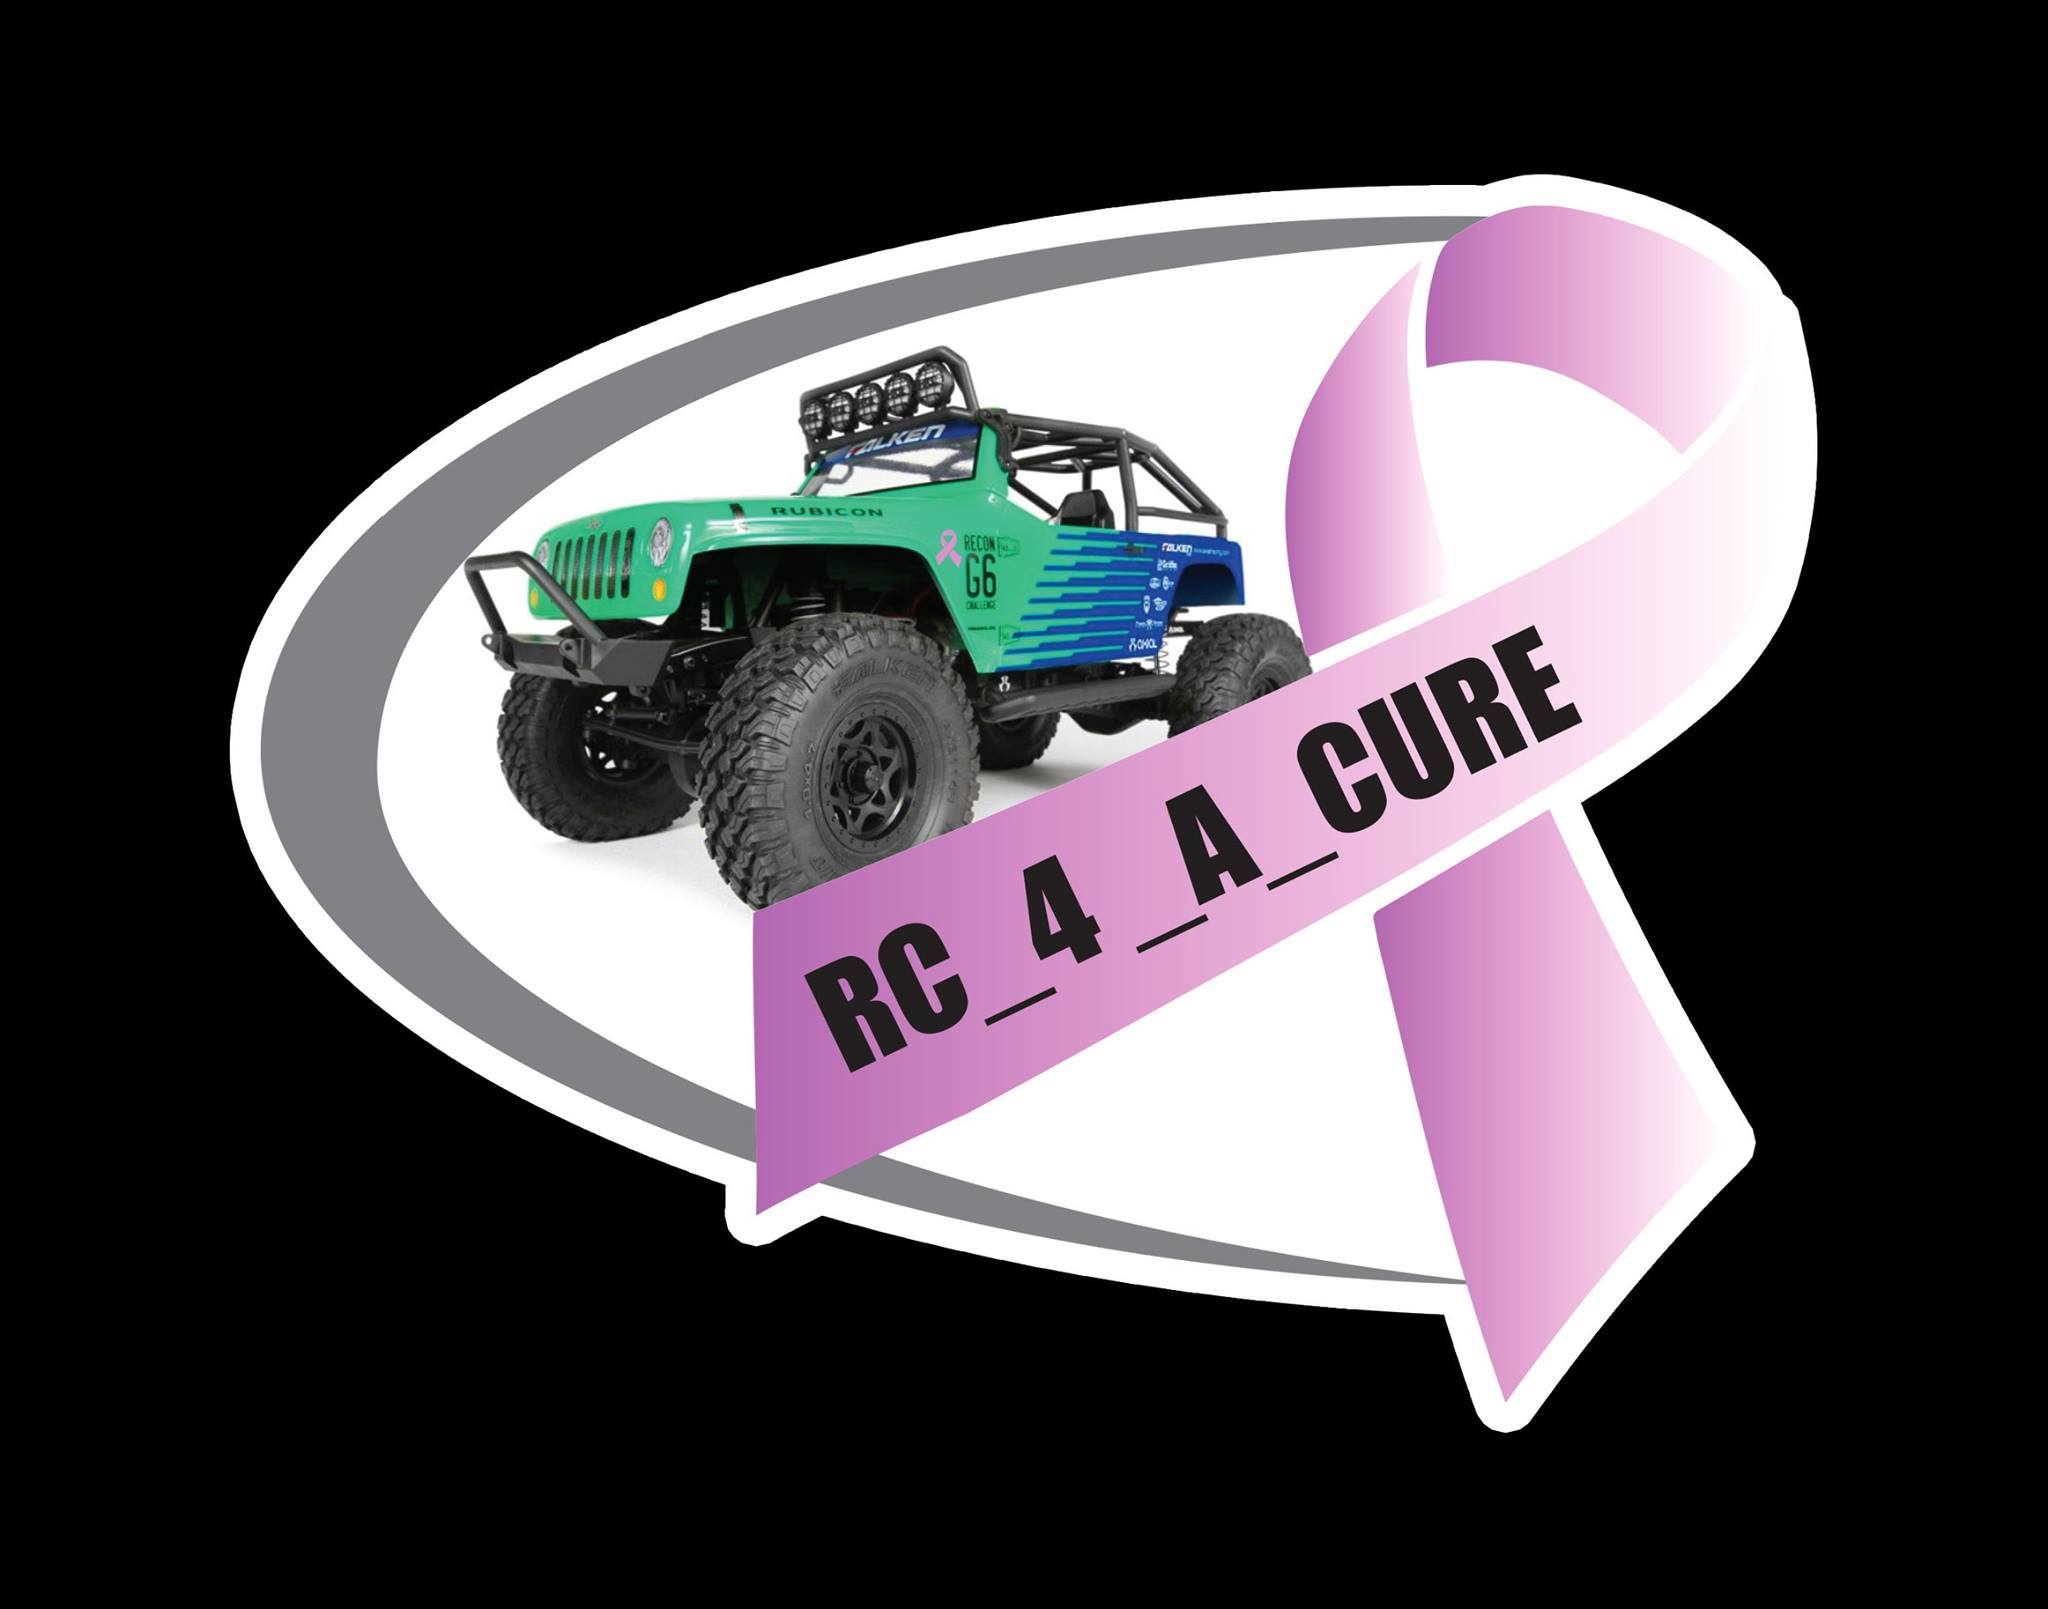 Celebrate Breast Cancer Awareness Month with RC_4_a_cure